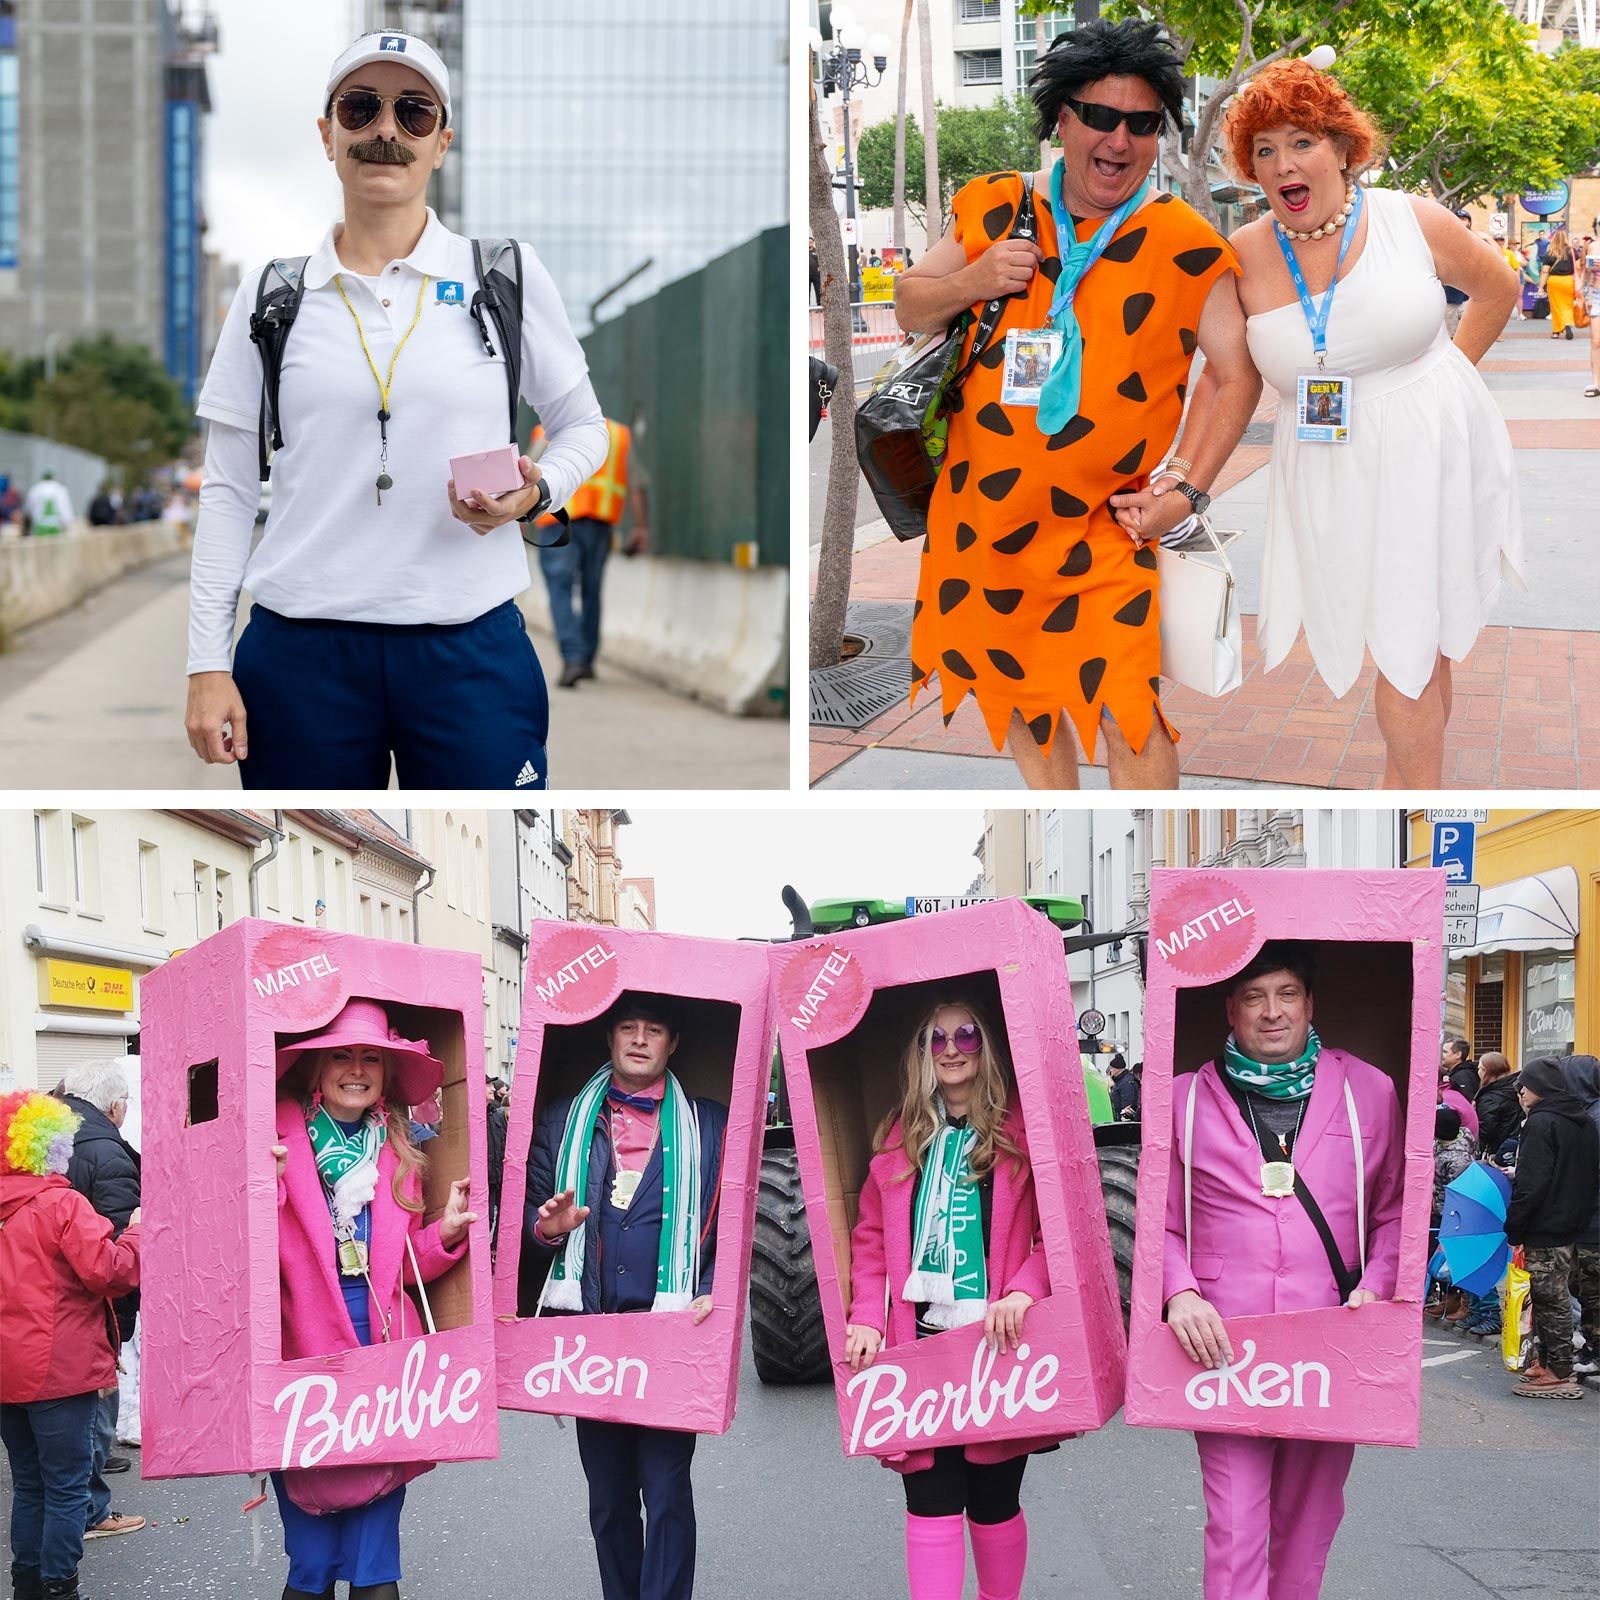 https://www.rd.com/wp-content/uploads/2021/09/RD-ecomm-group-halloween-costumes-getty-images-3.jpg